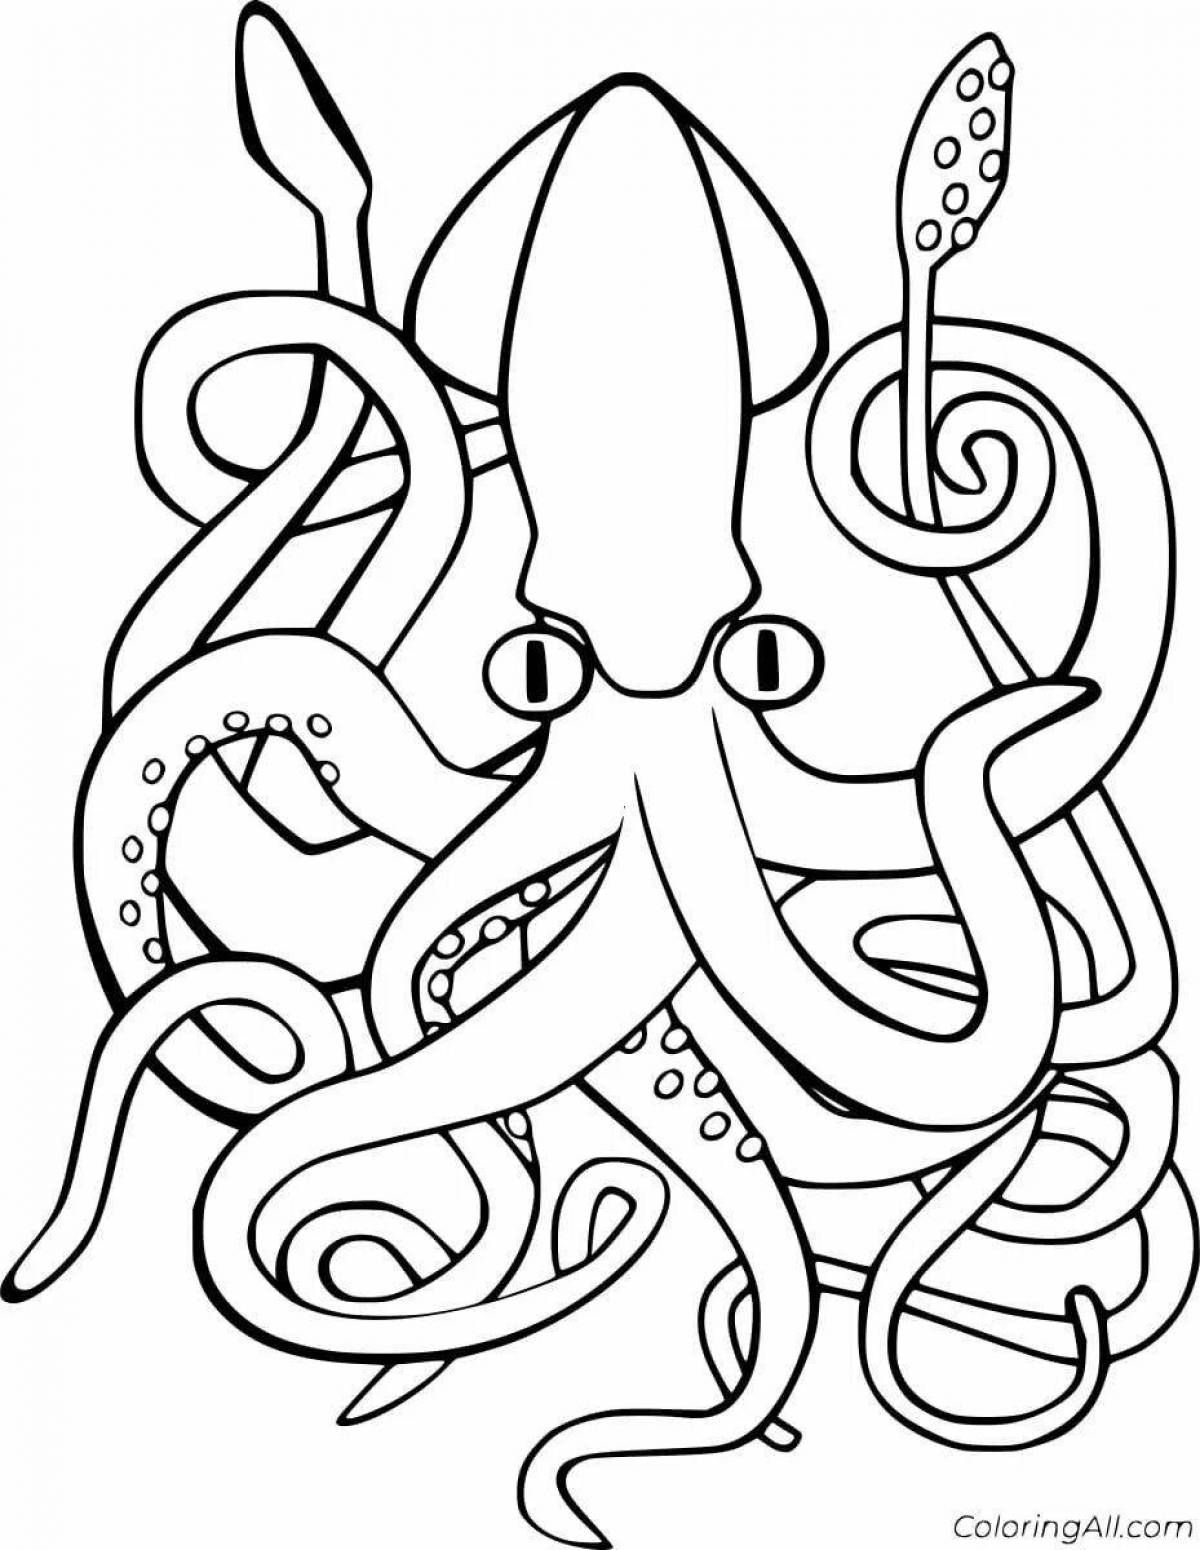 Amazing squid coloring game for kids